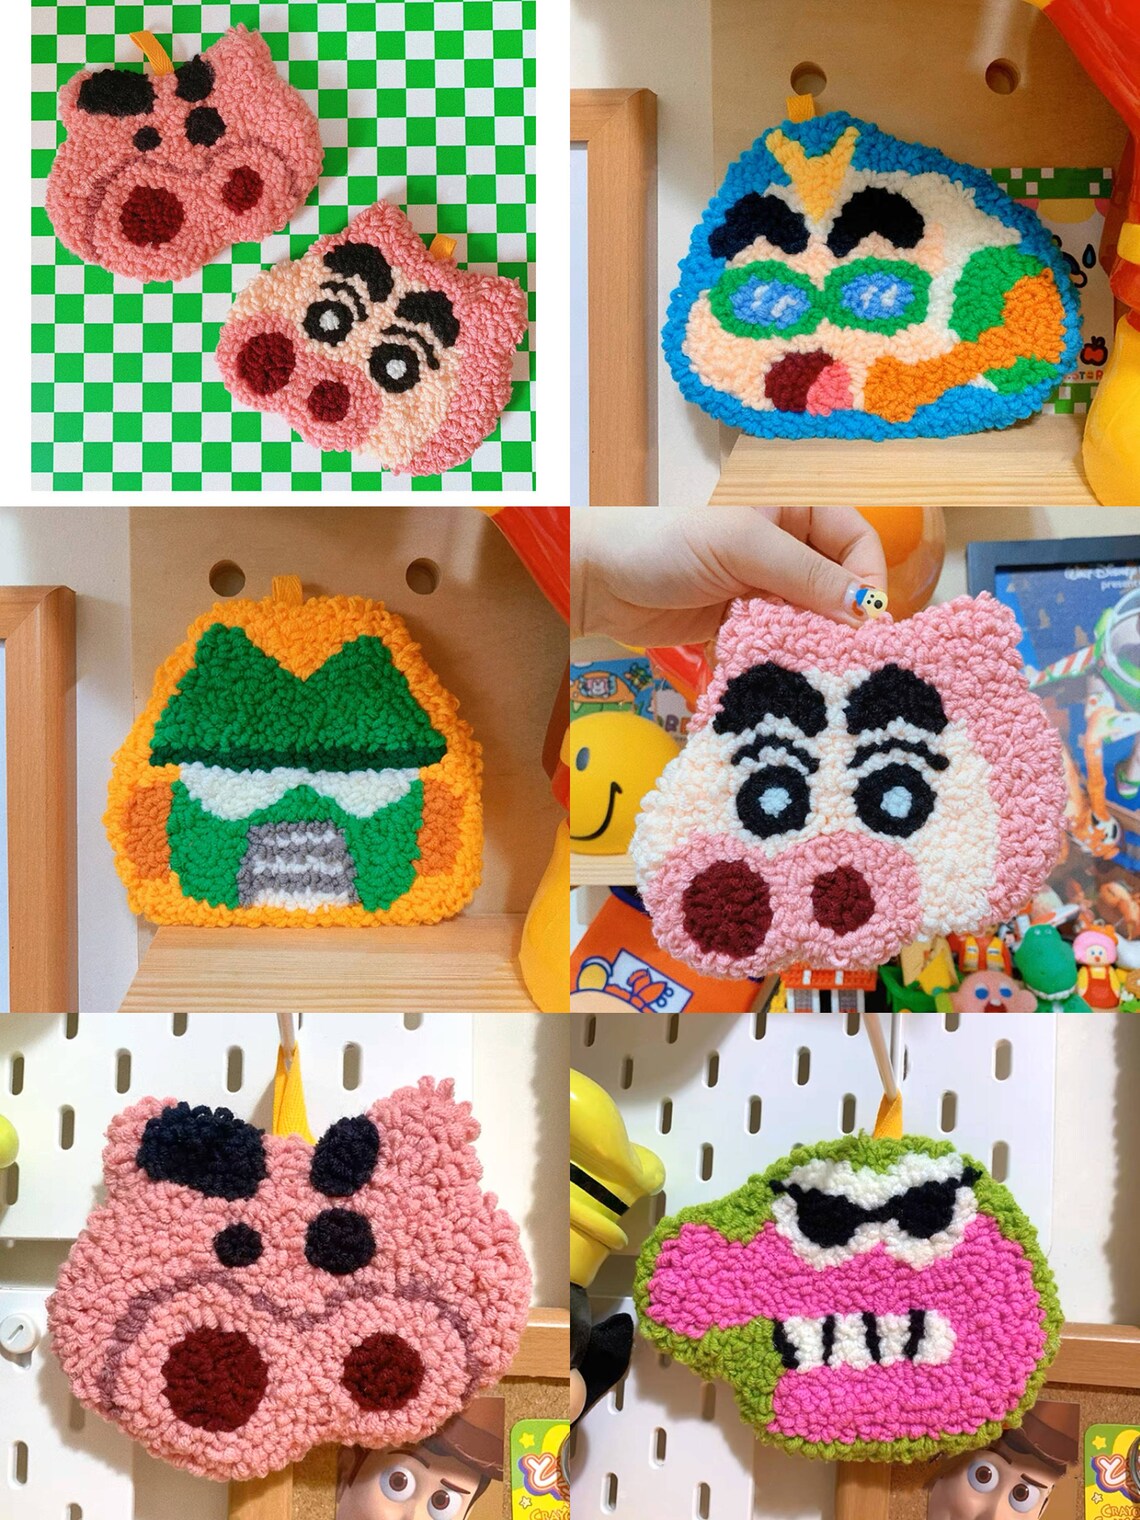 Cute Cartoon Own Design Punch Needle Coaster DIY Kit with Yarn Set | Crayon Shinchan - All materials included